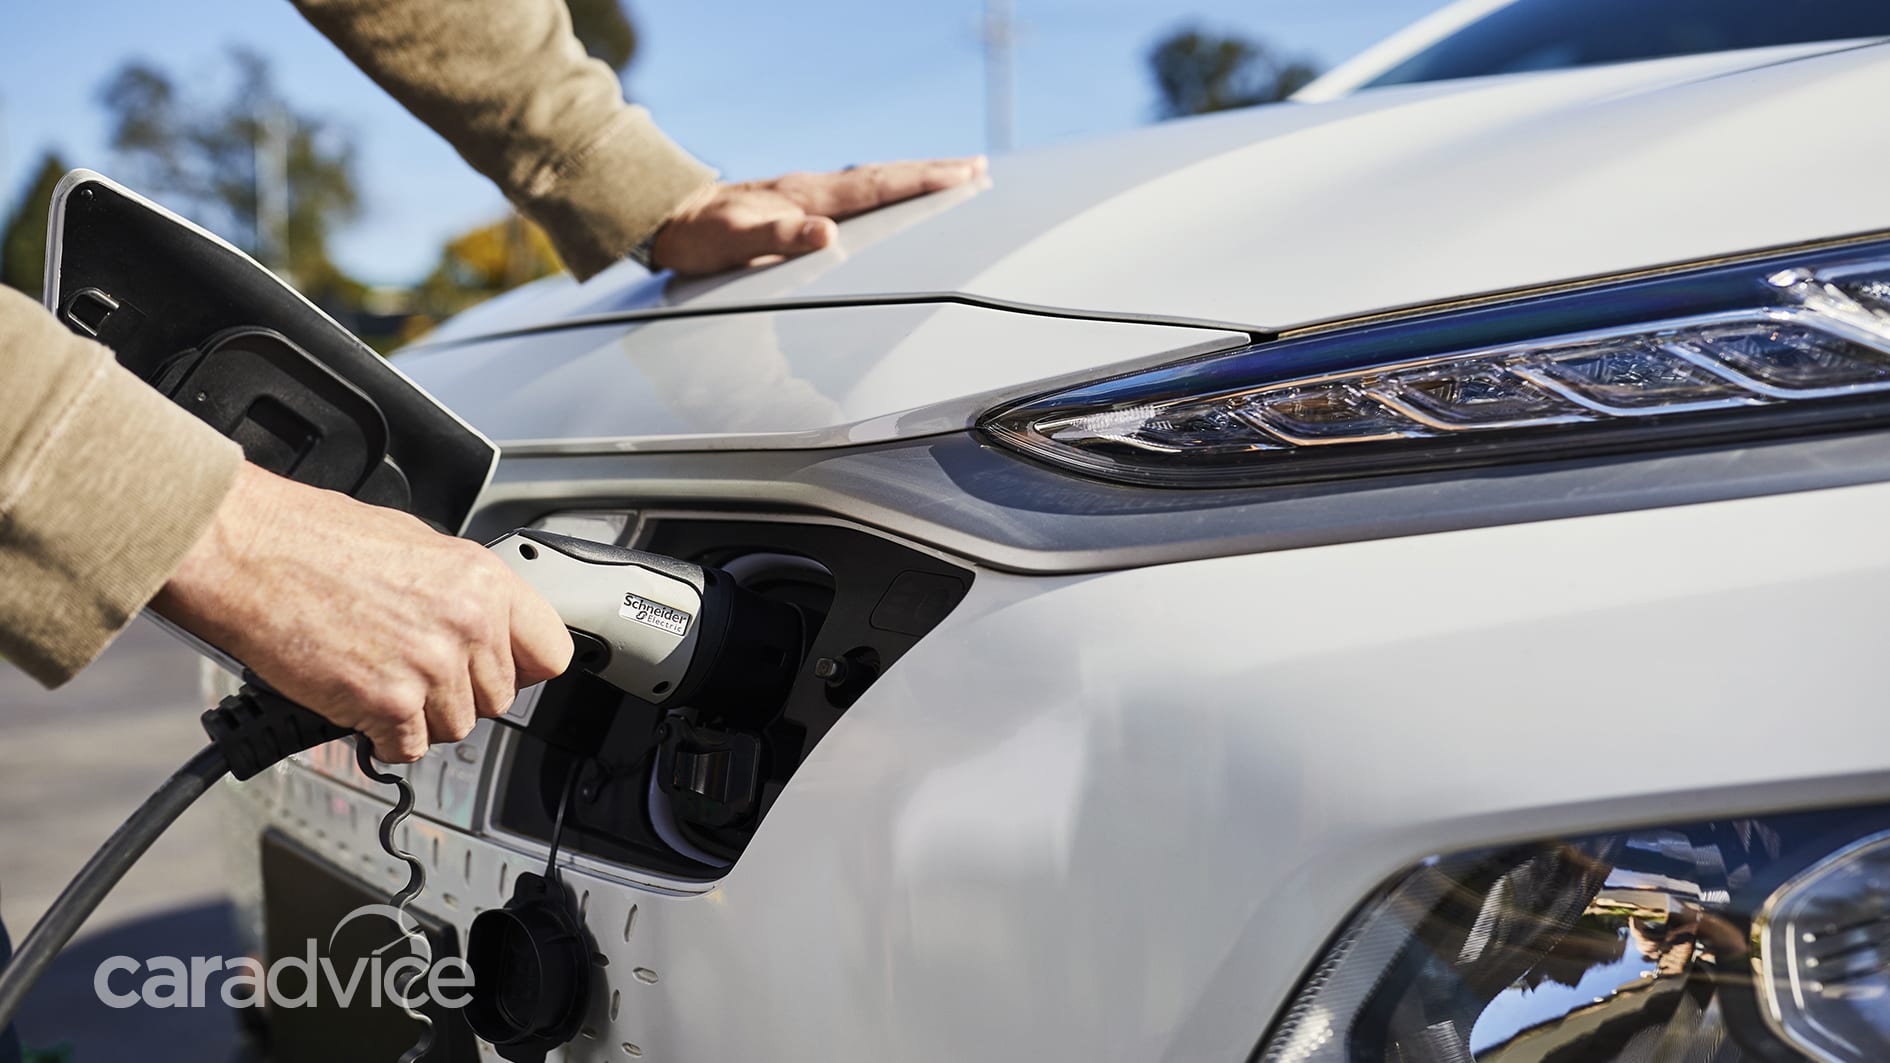 NSW's ambitious plans to speed up electric vehicle adoption CarAdvice